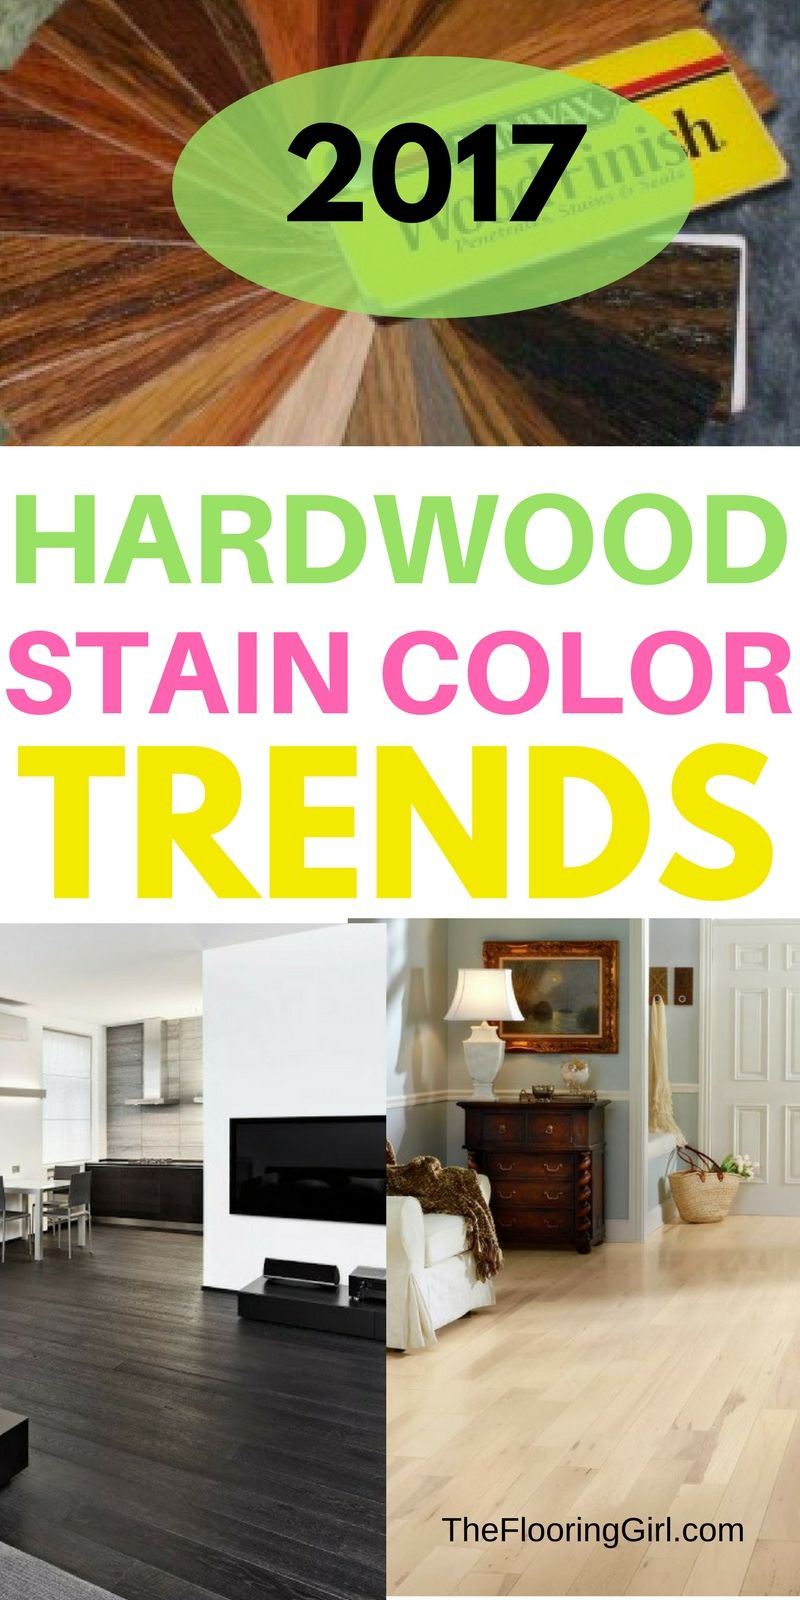 15 Famous Wood Filler for Hardwood Floor Scratches 2024 free download wood filler for hardwood floor scratches of hardwood flooring stain color trends 2018 more from the flooring pertaining to hardwood flooring stain color trends for 2017 hardwood colors that 